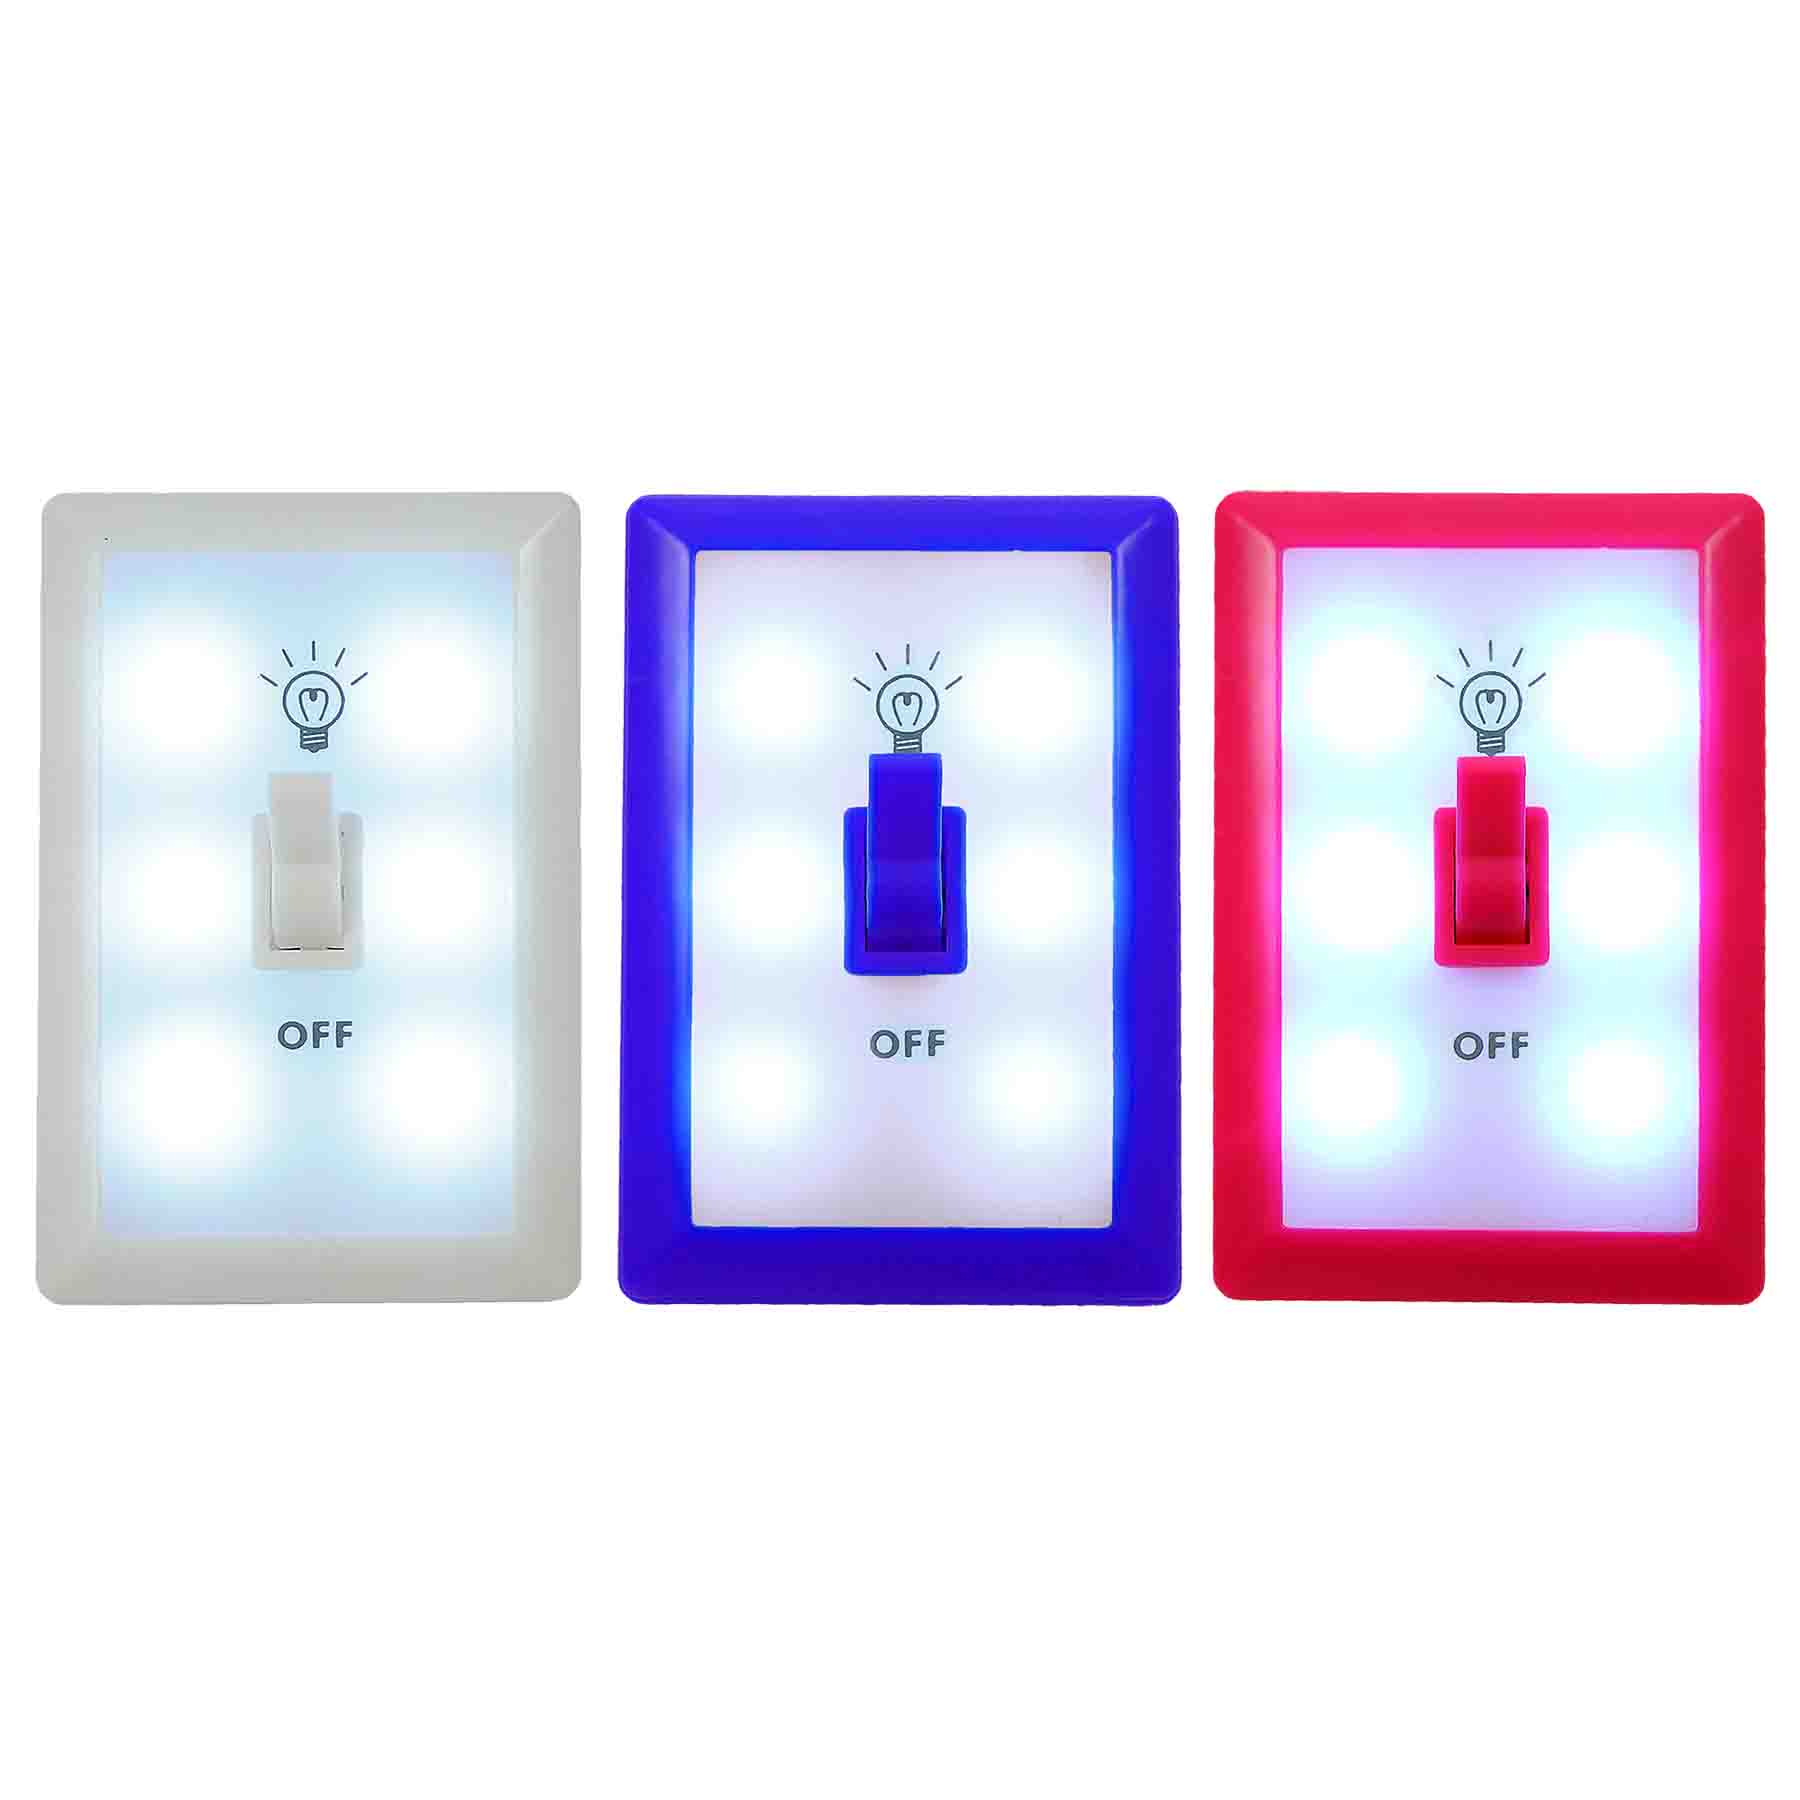 702178-3Colors Light Switch ON 1800 LoRes